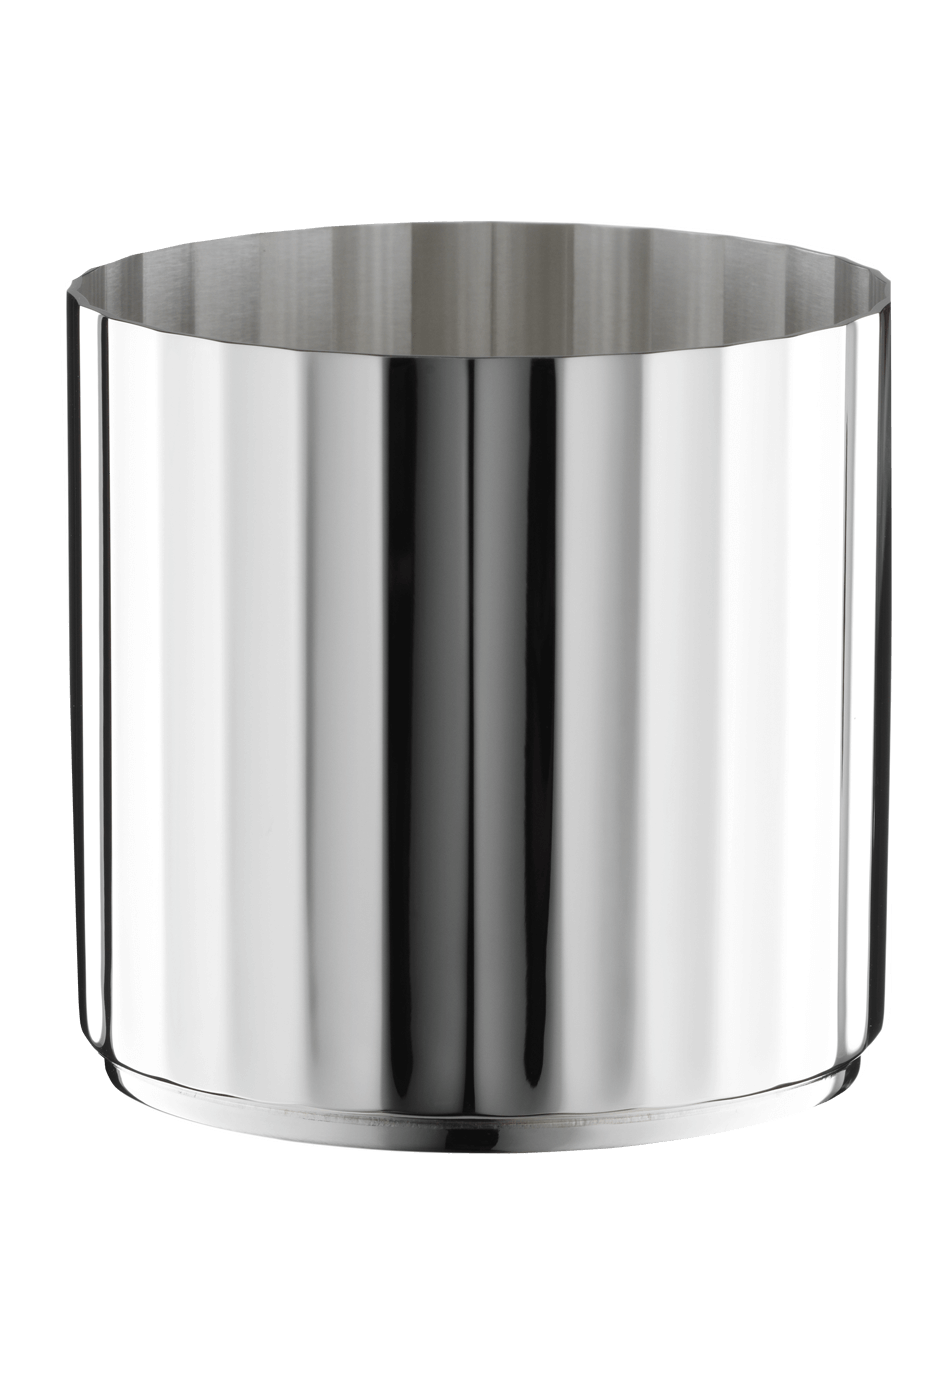 Belvedere Whiskey tumbler (90g silverplated)